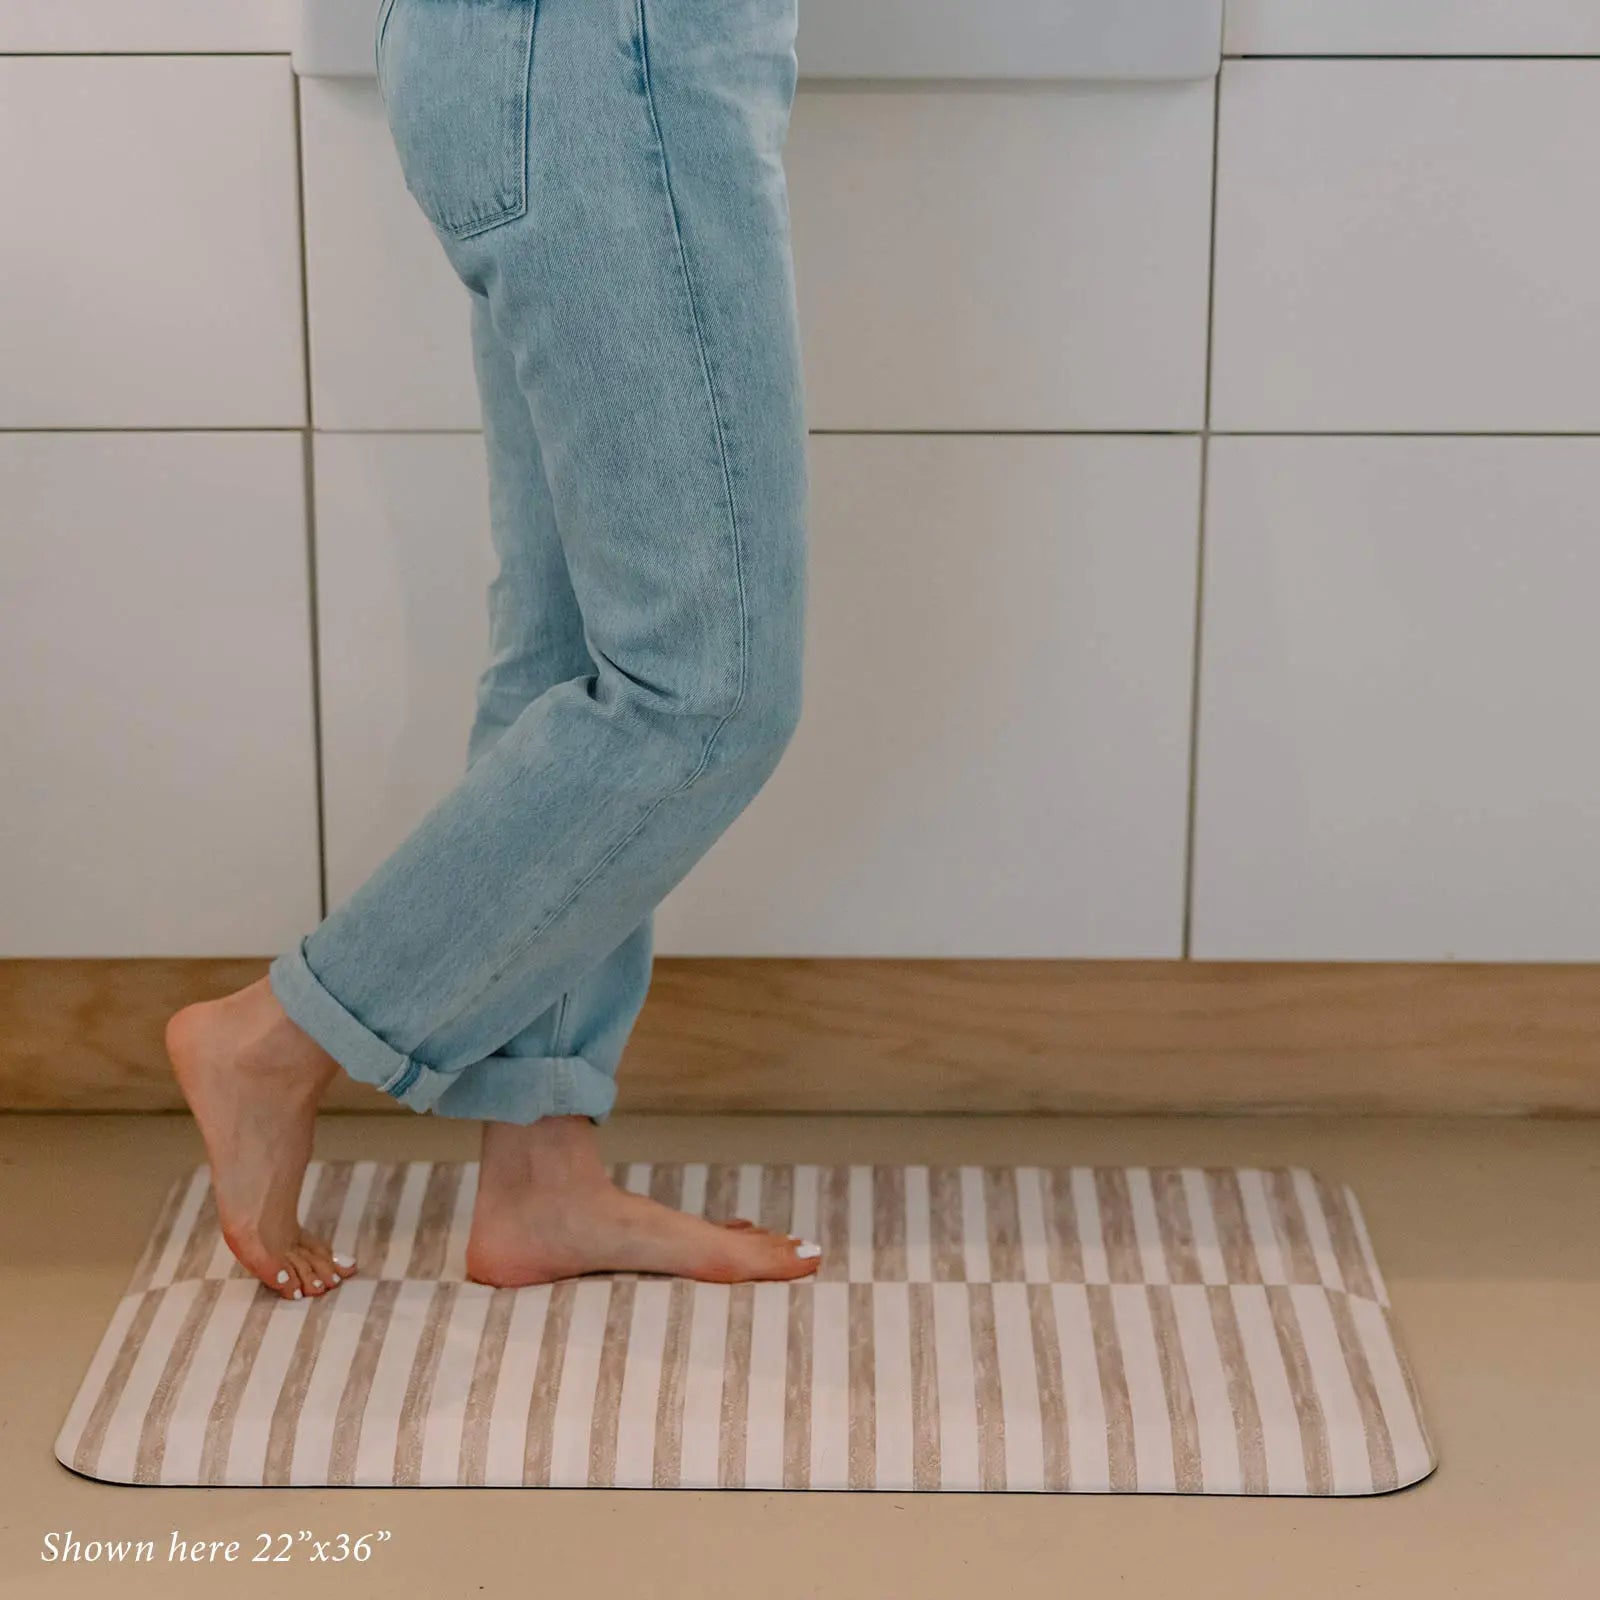 Reese chai beige and white inverted stripe standing mat shown in kitchen in size 22x36 with womans feet standing on the mat